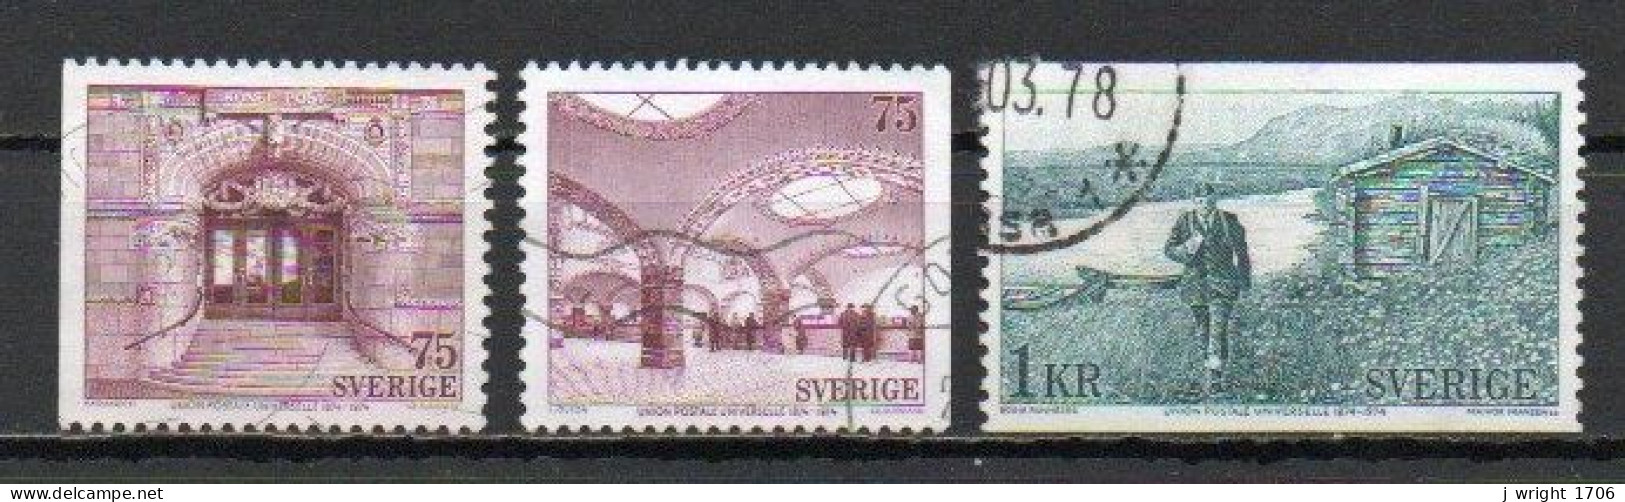 Sweden, 1974, UPU Centenary, Set, USED - Used Stamps